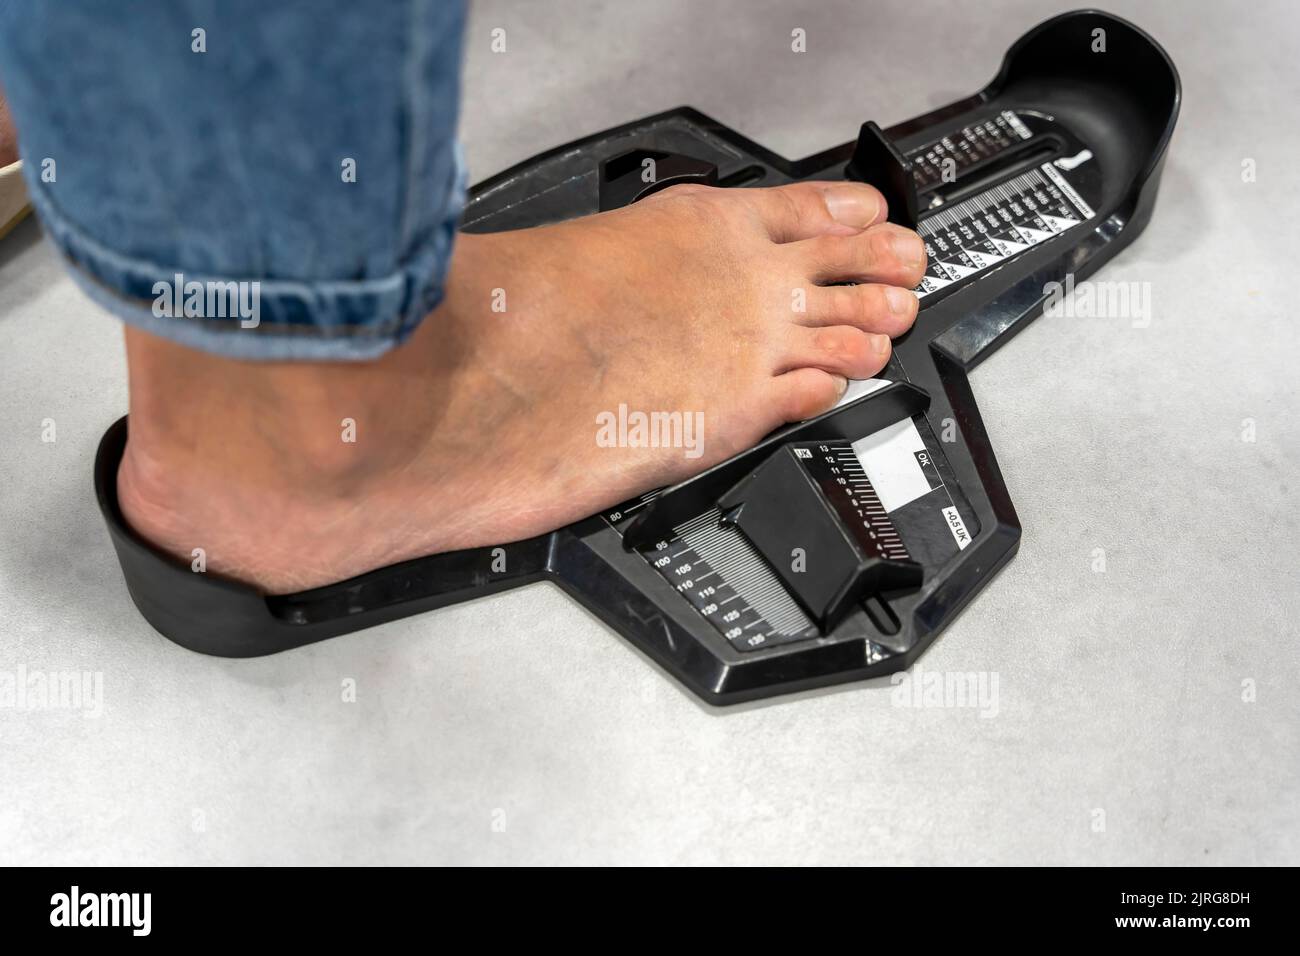 Boy Measure His Feet Using Measuring Tape Stock Photo - Image of  activities, appearance: 104119502